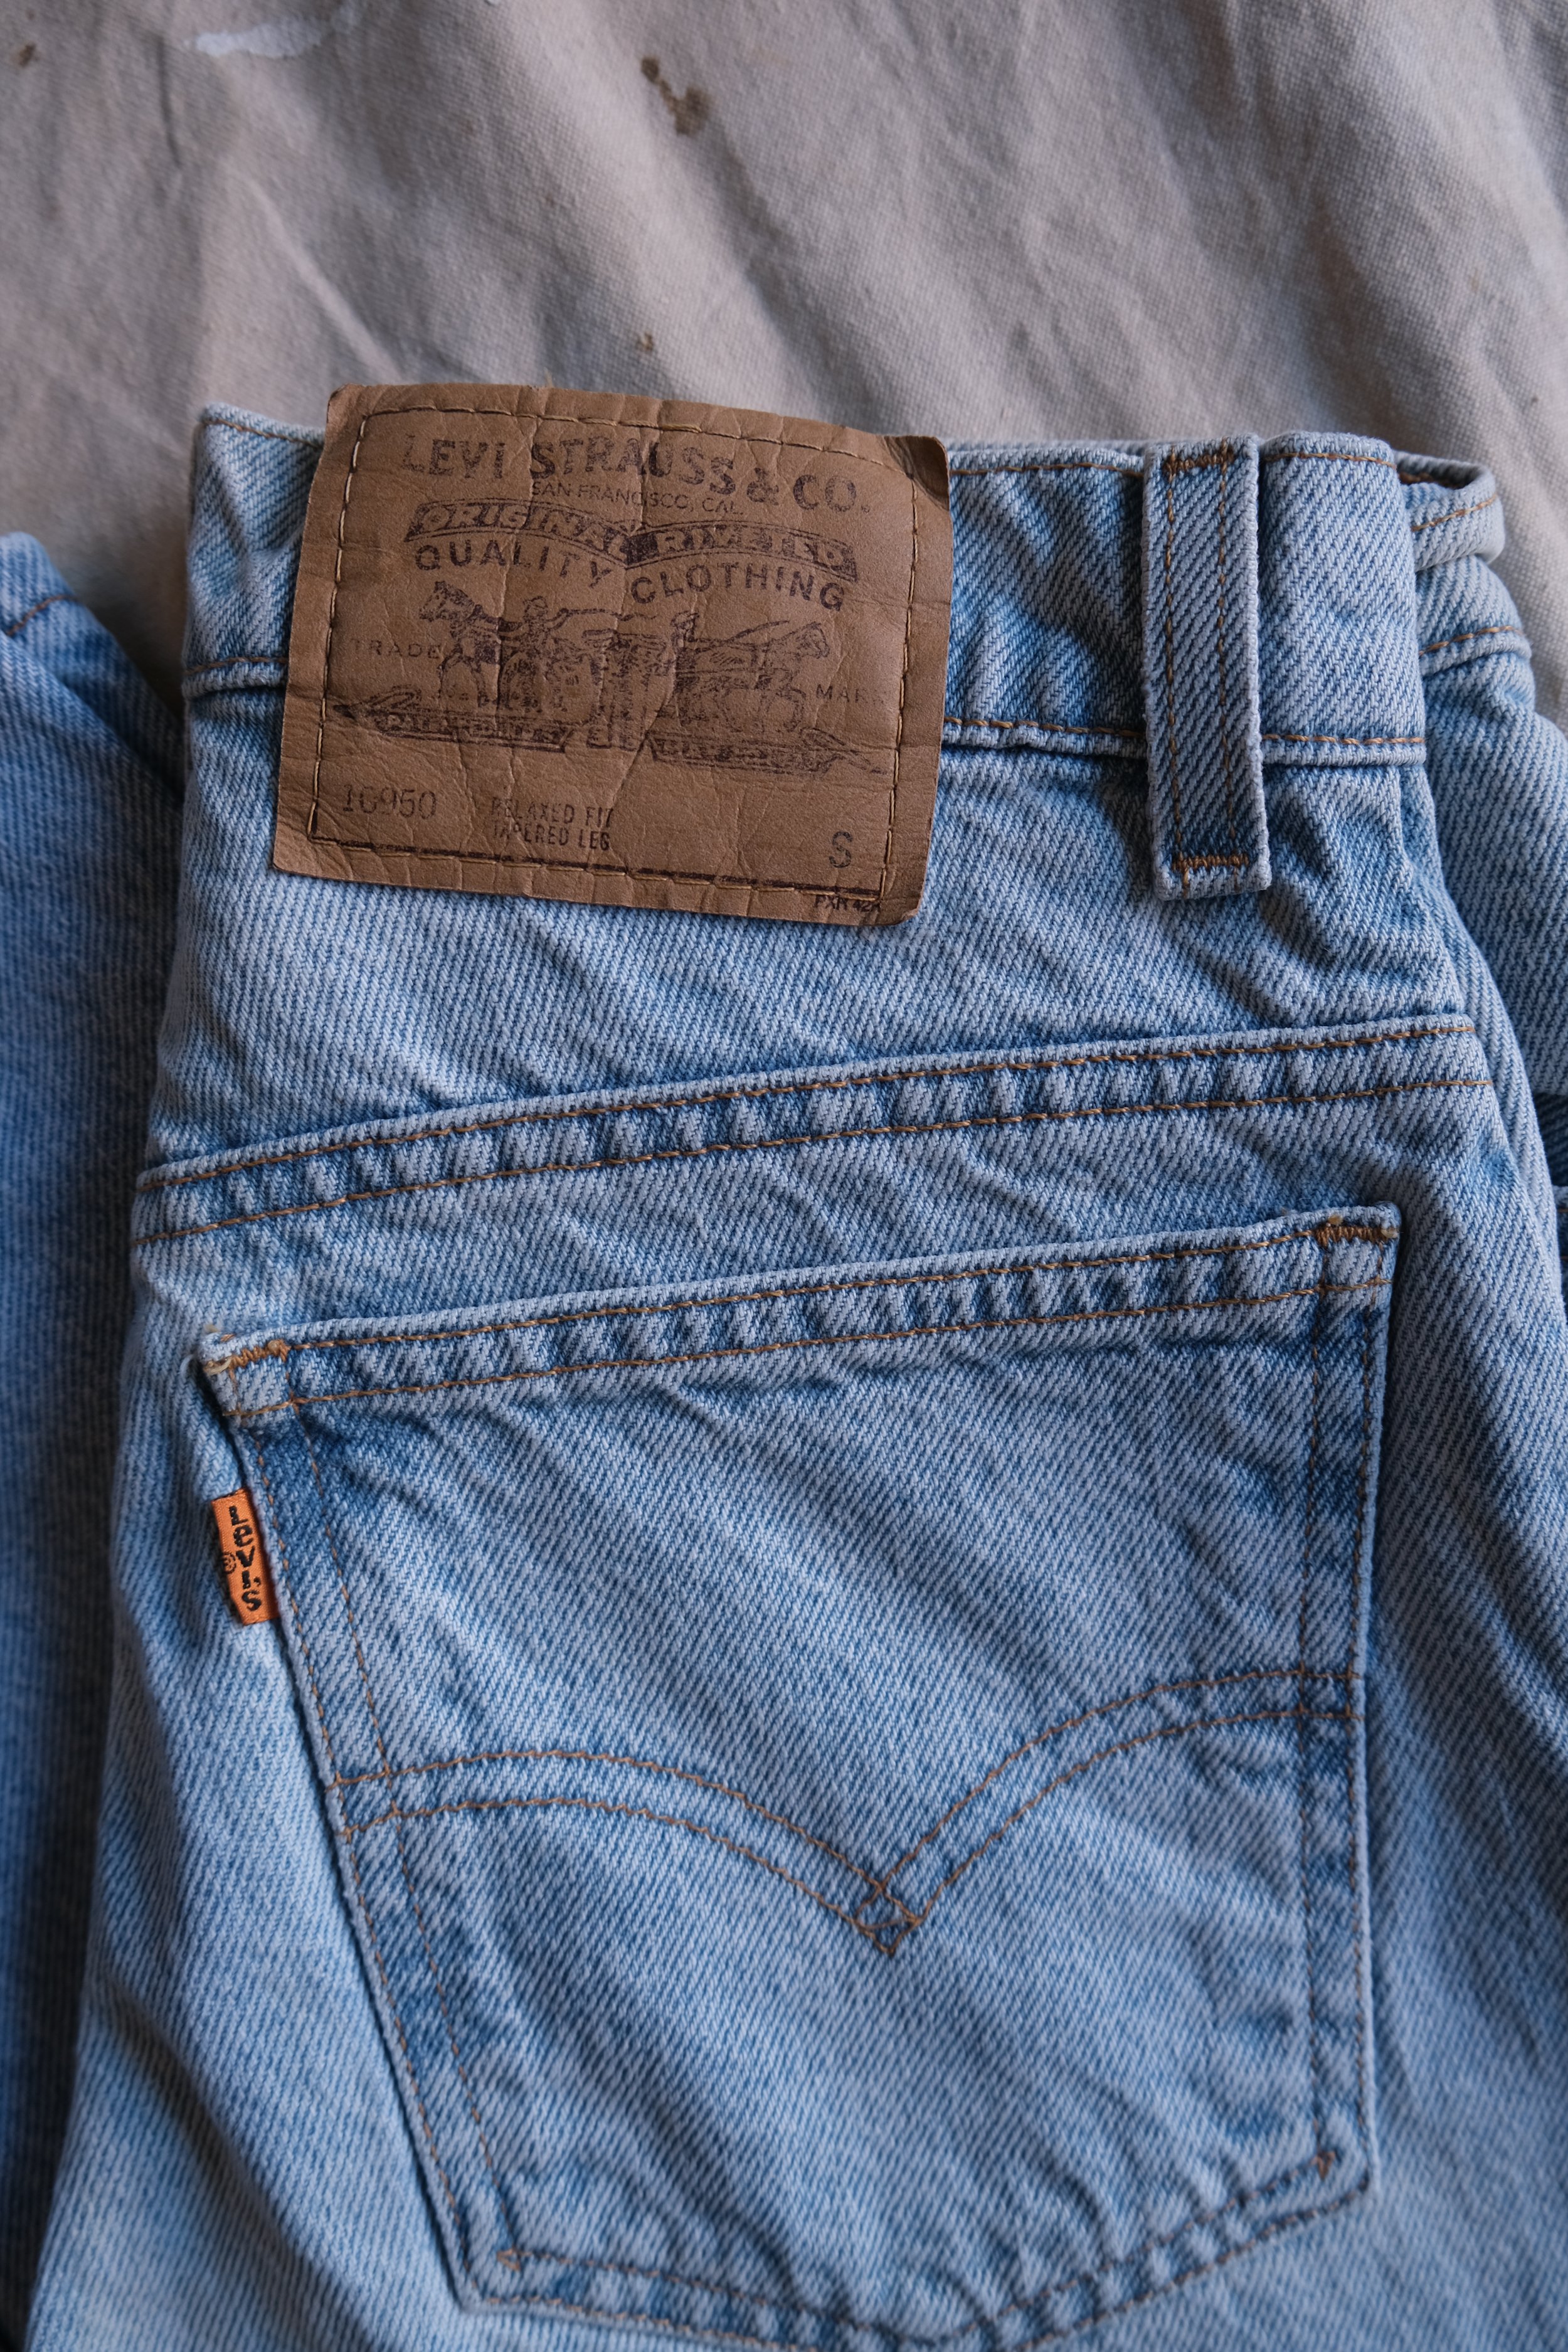 27 x Levis Orange Tab Relaxed Fit Tapered Leg —